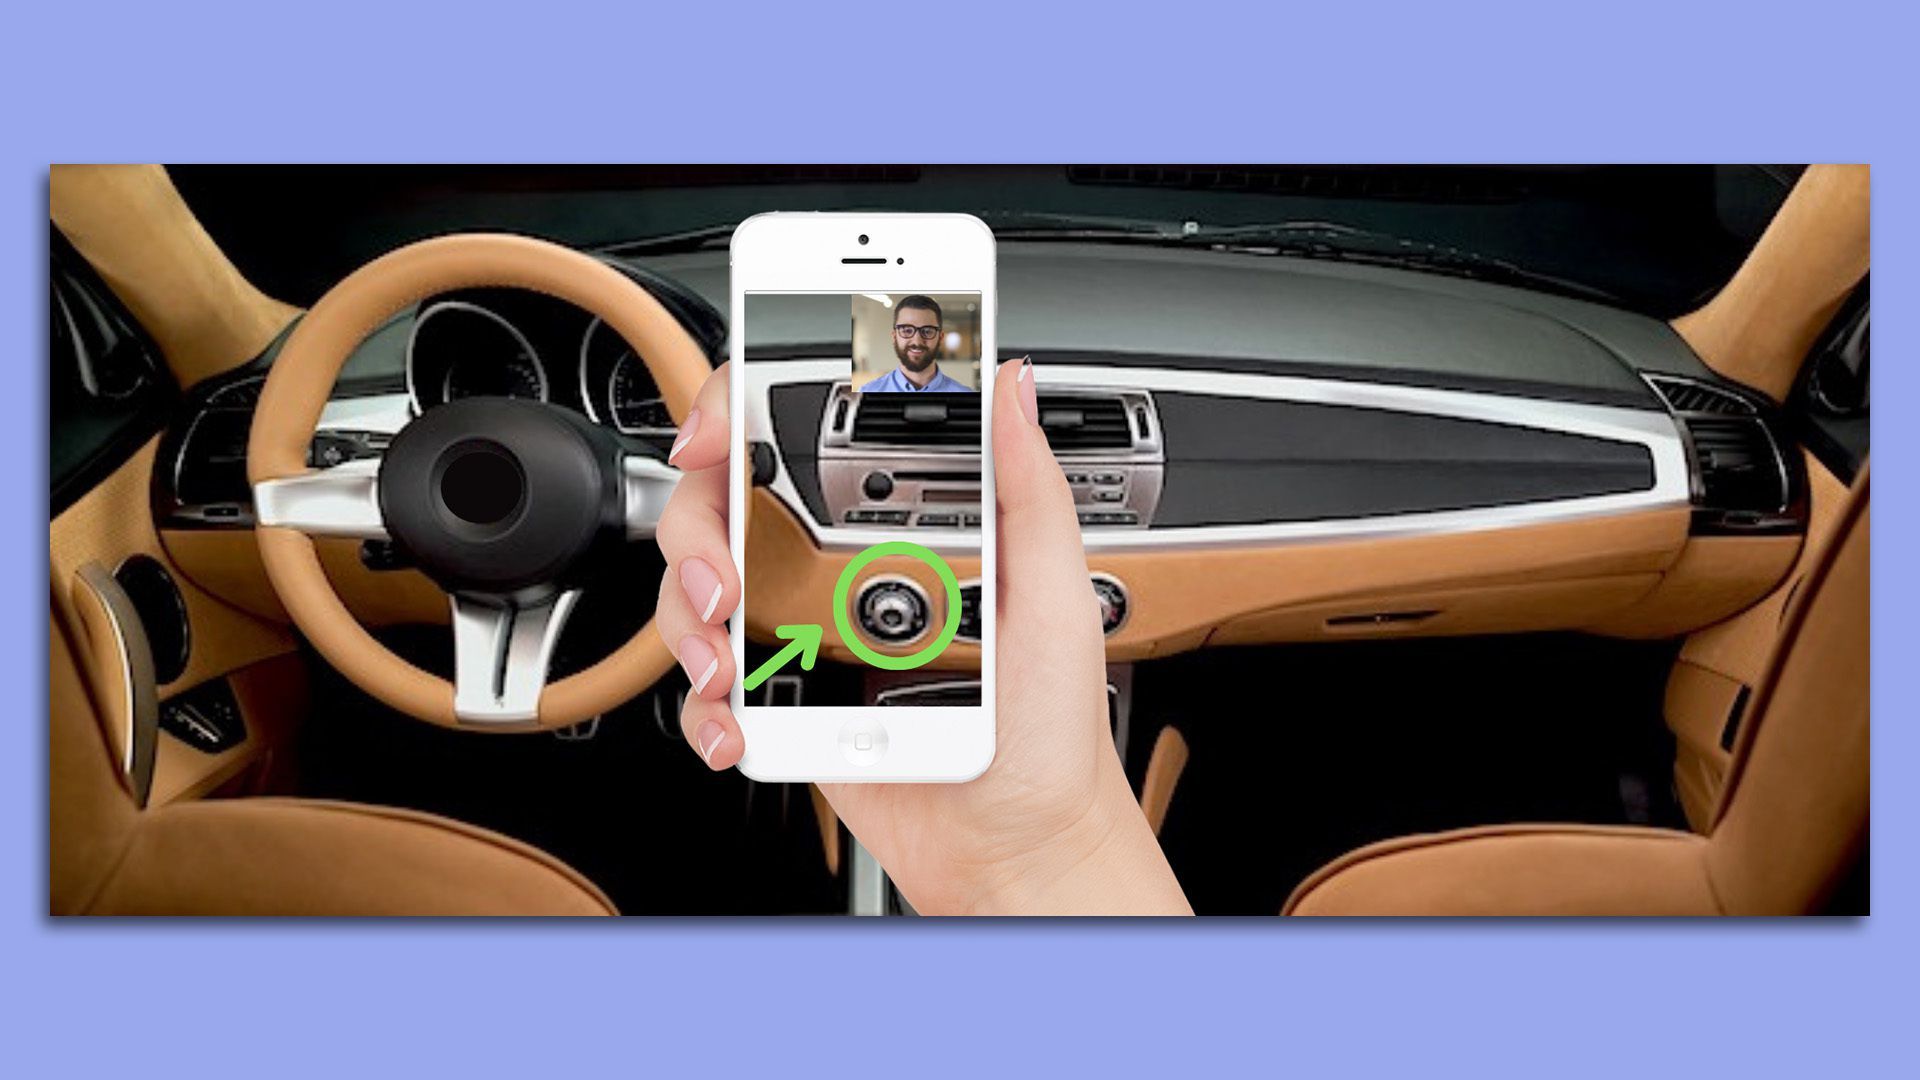 A phone held next to a steering wheel shows video tech support in action.